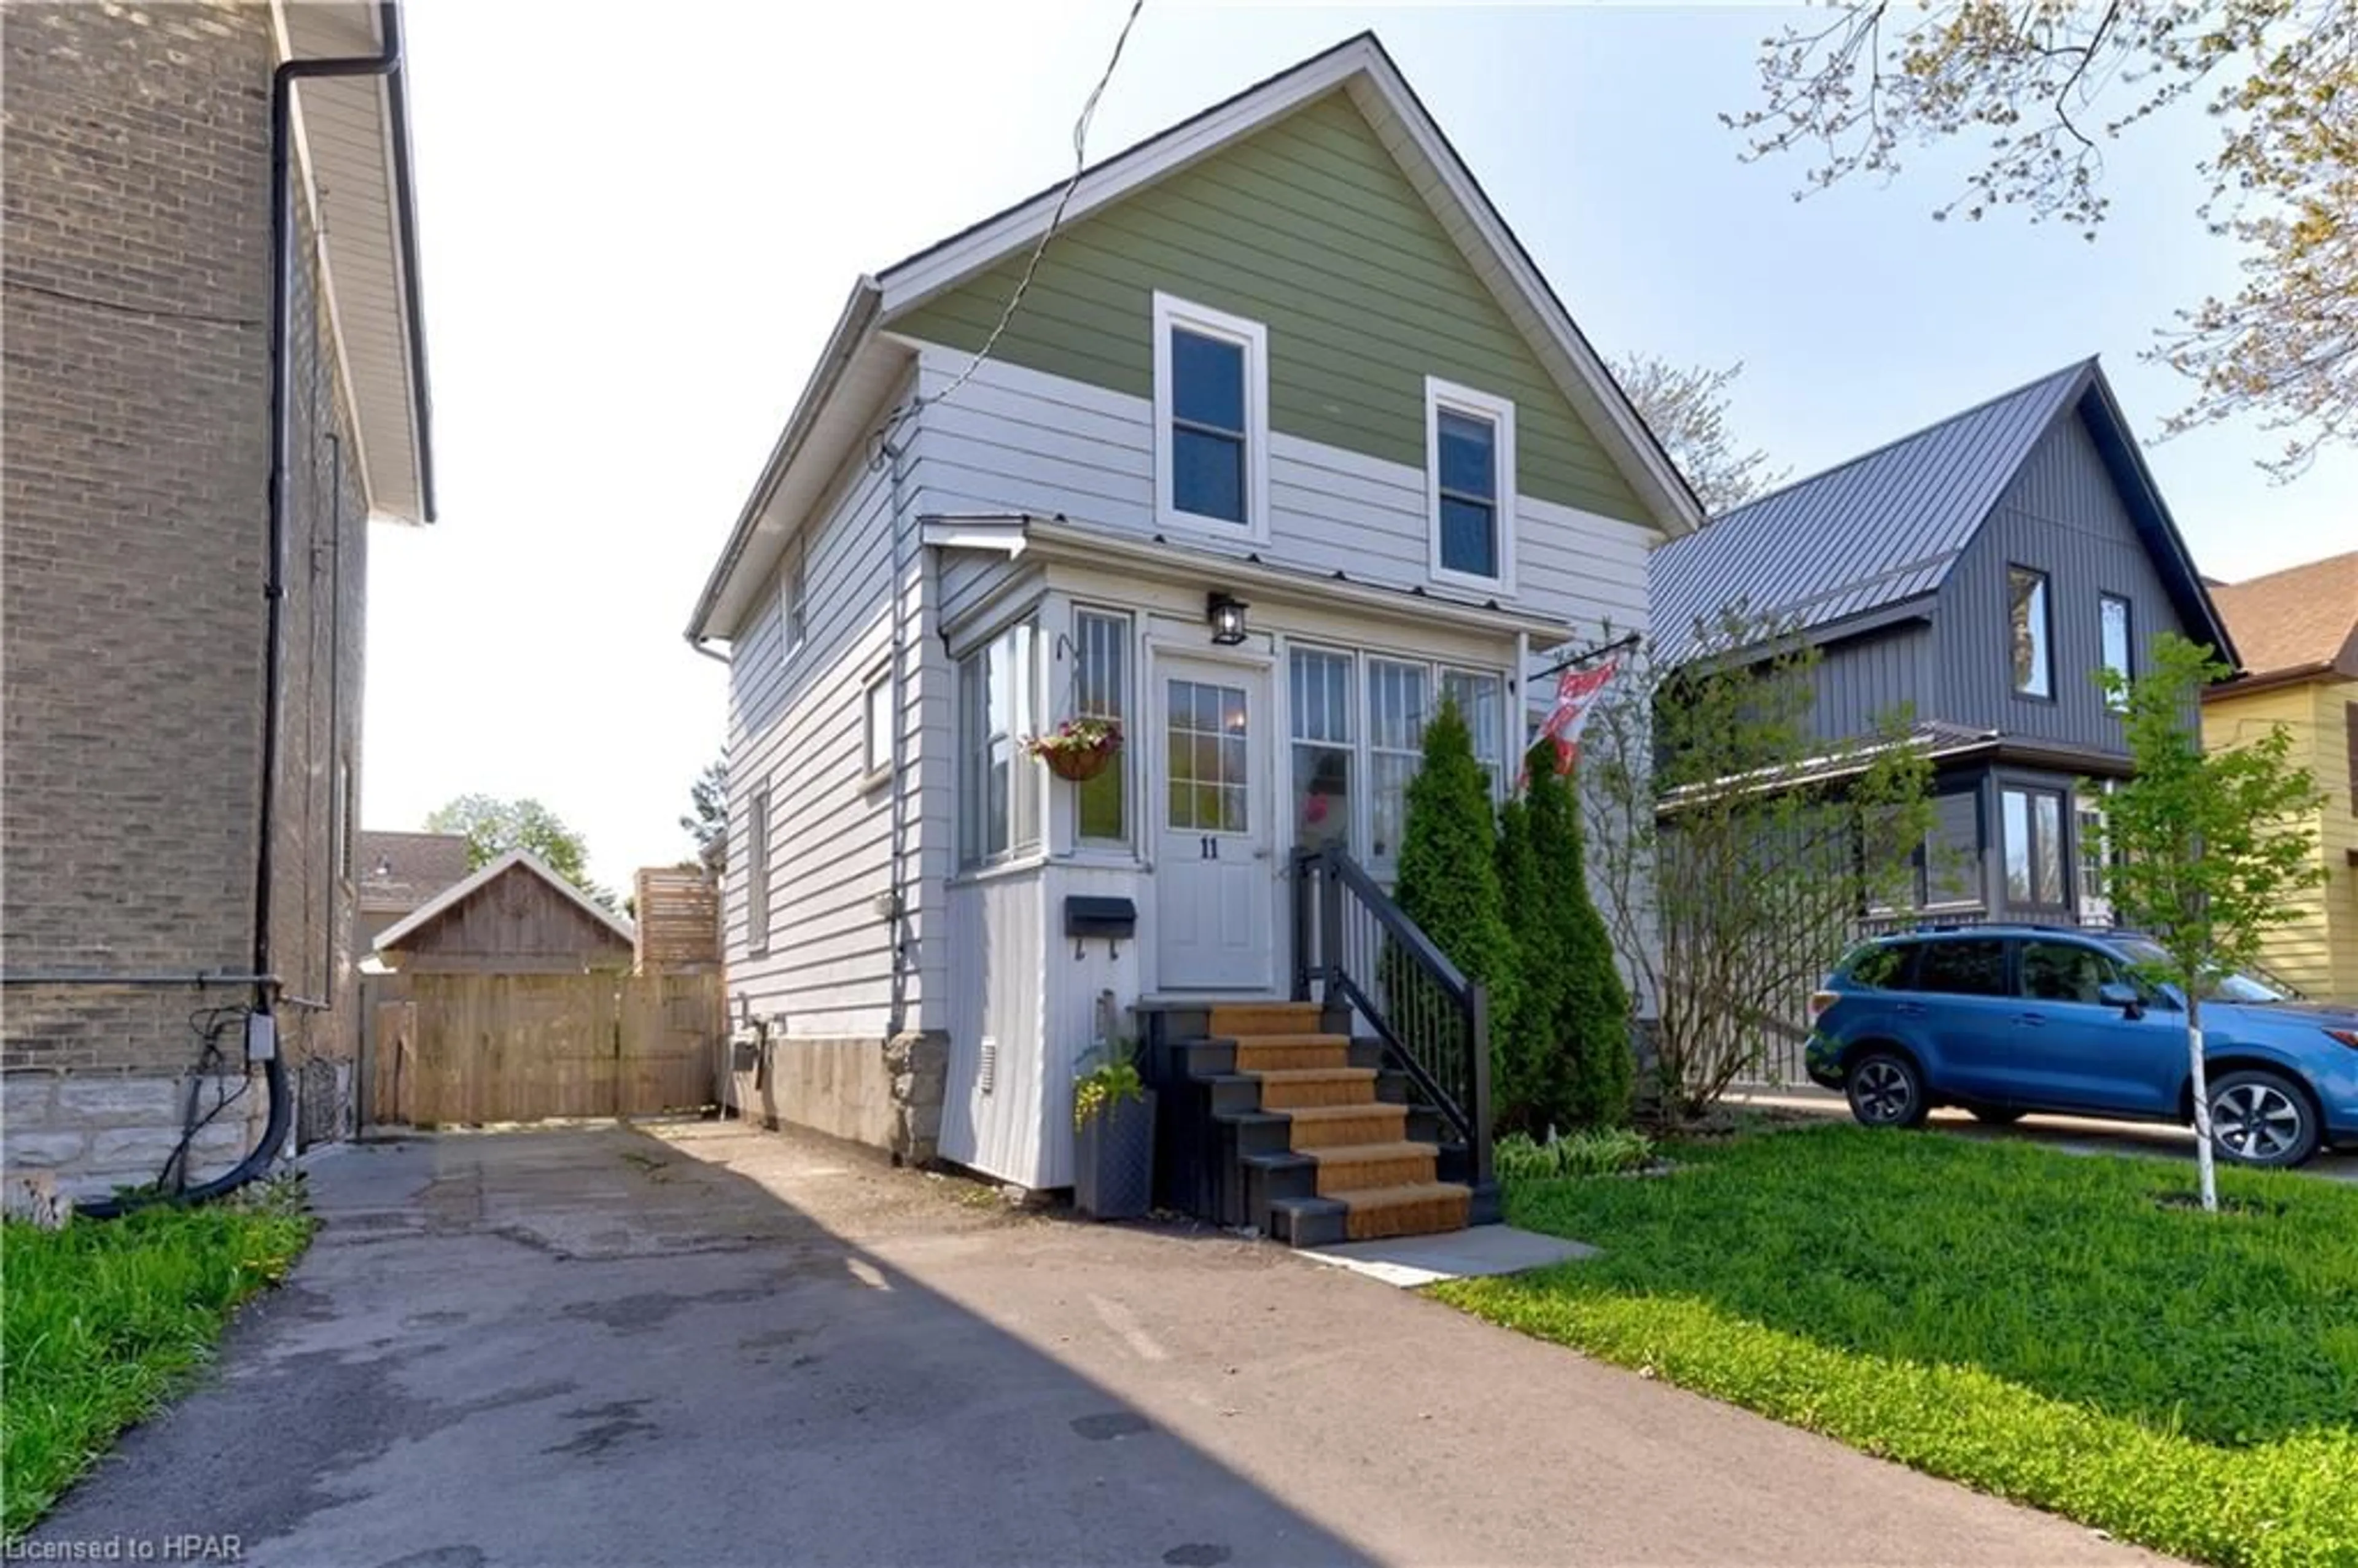 Frontside or backside of a home for 11 Mckenzie St, Stratford Ontario N5A 2B5